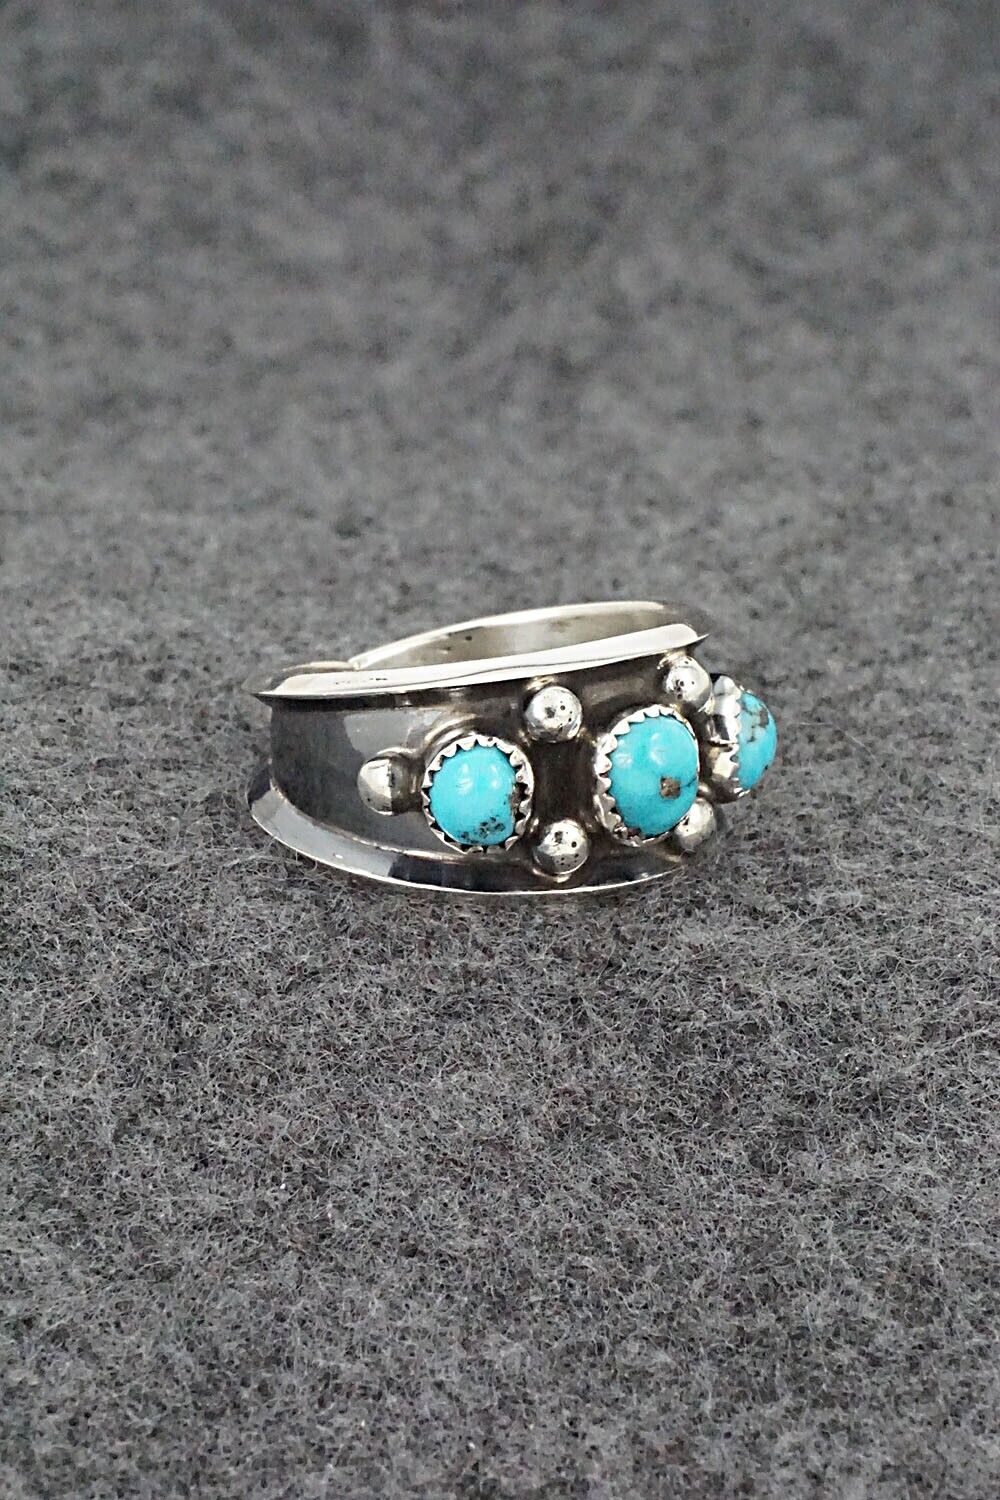 Turquoise & Sterling Silver Ring - Paul Largo - Size 10